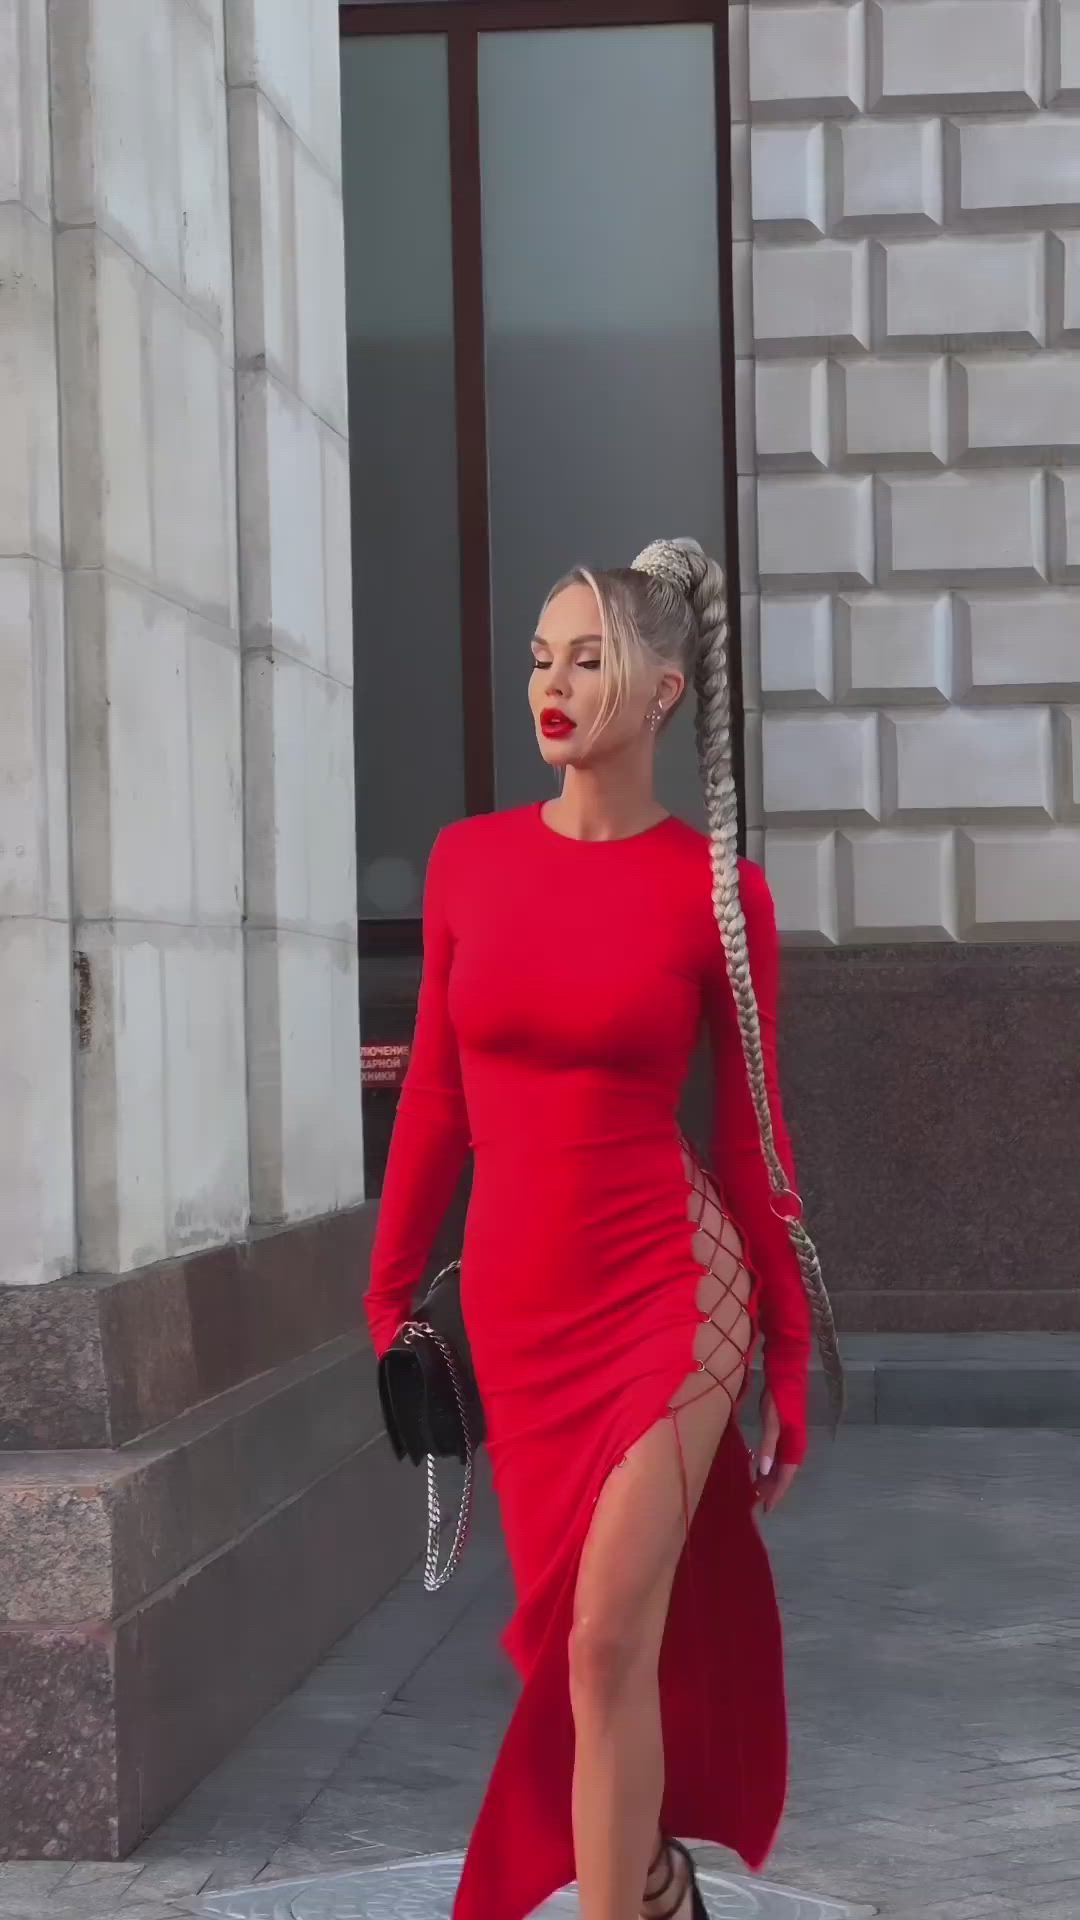 This may contain: a woman in a red dress with braids on her head is walking down the street